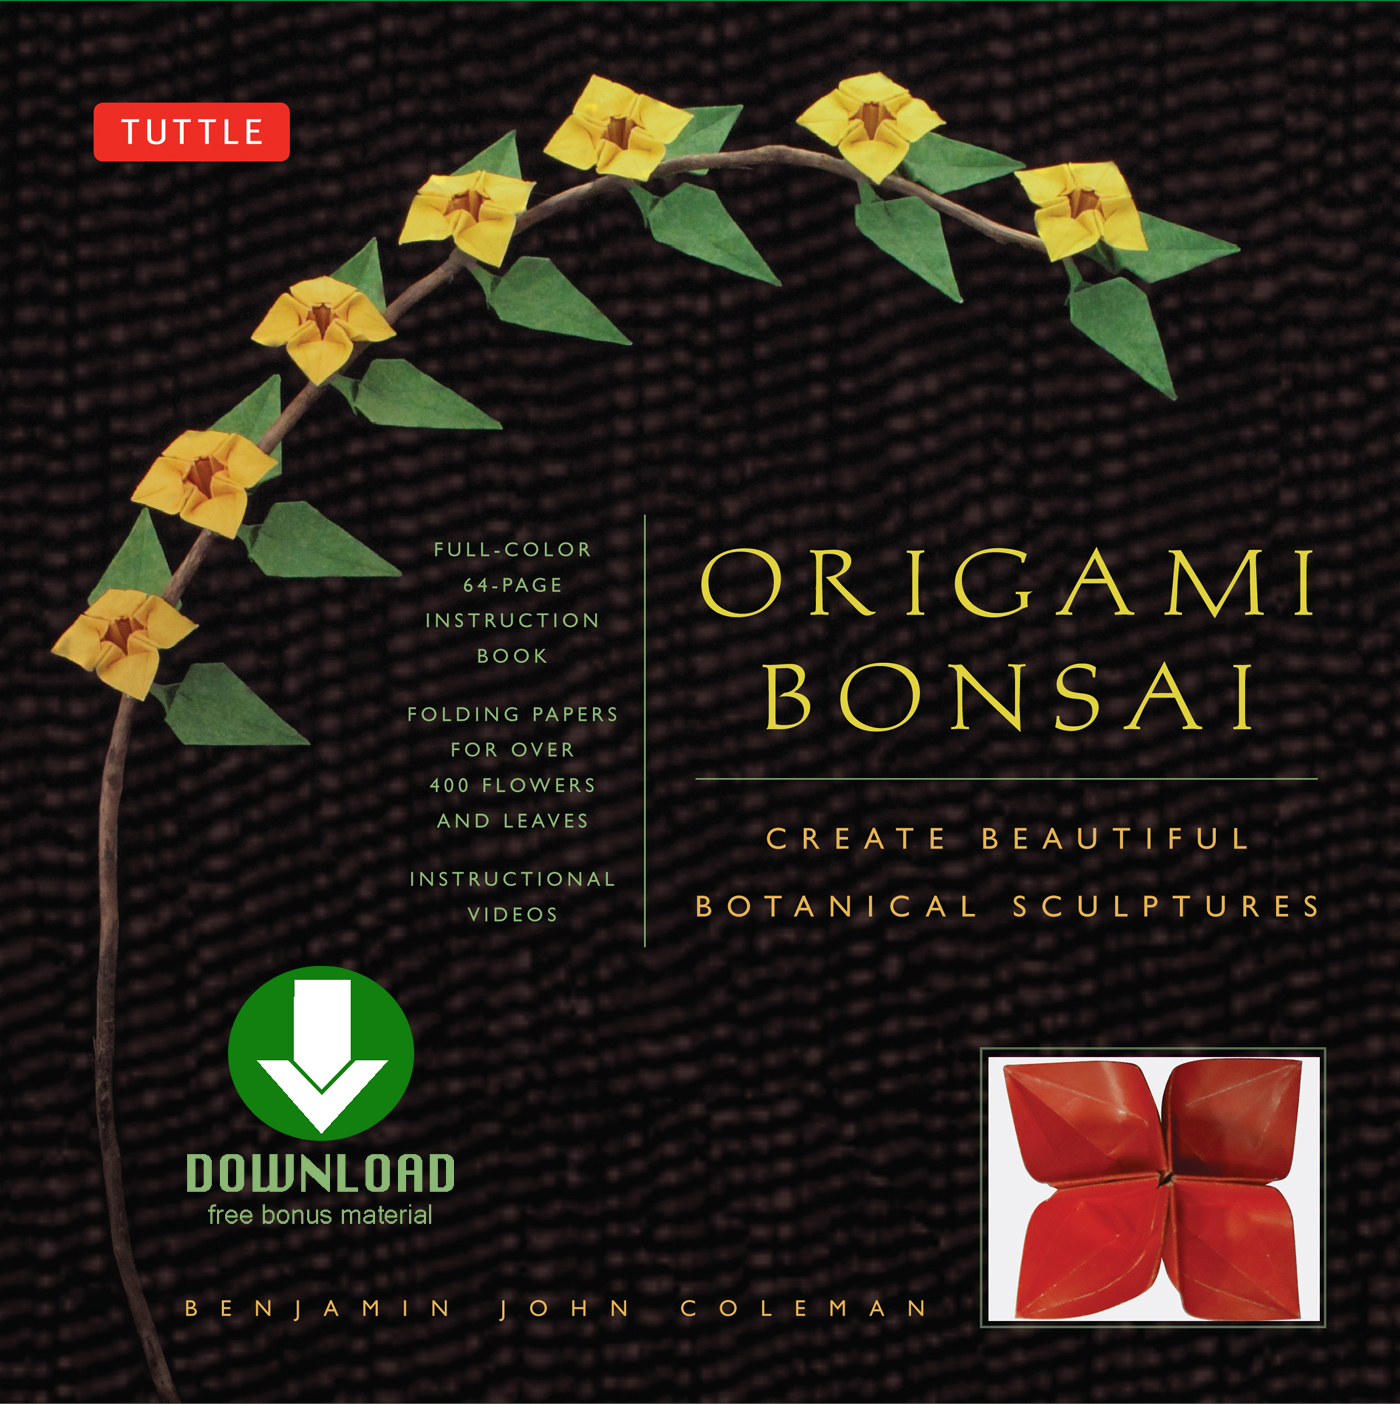 Origami Bonsai Kit Create Beautiful Botanical Sculptures Create Beautiful Botanical Sculptures Includes Origami Book with 14 Beautiful Projects 48 Origami Papers and Instructional DVD - image 1